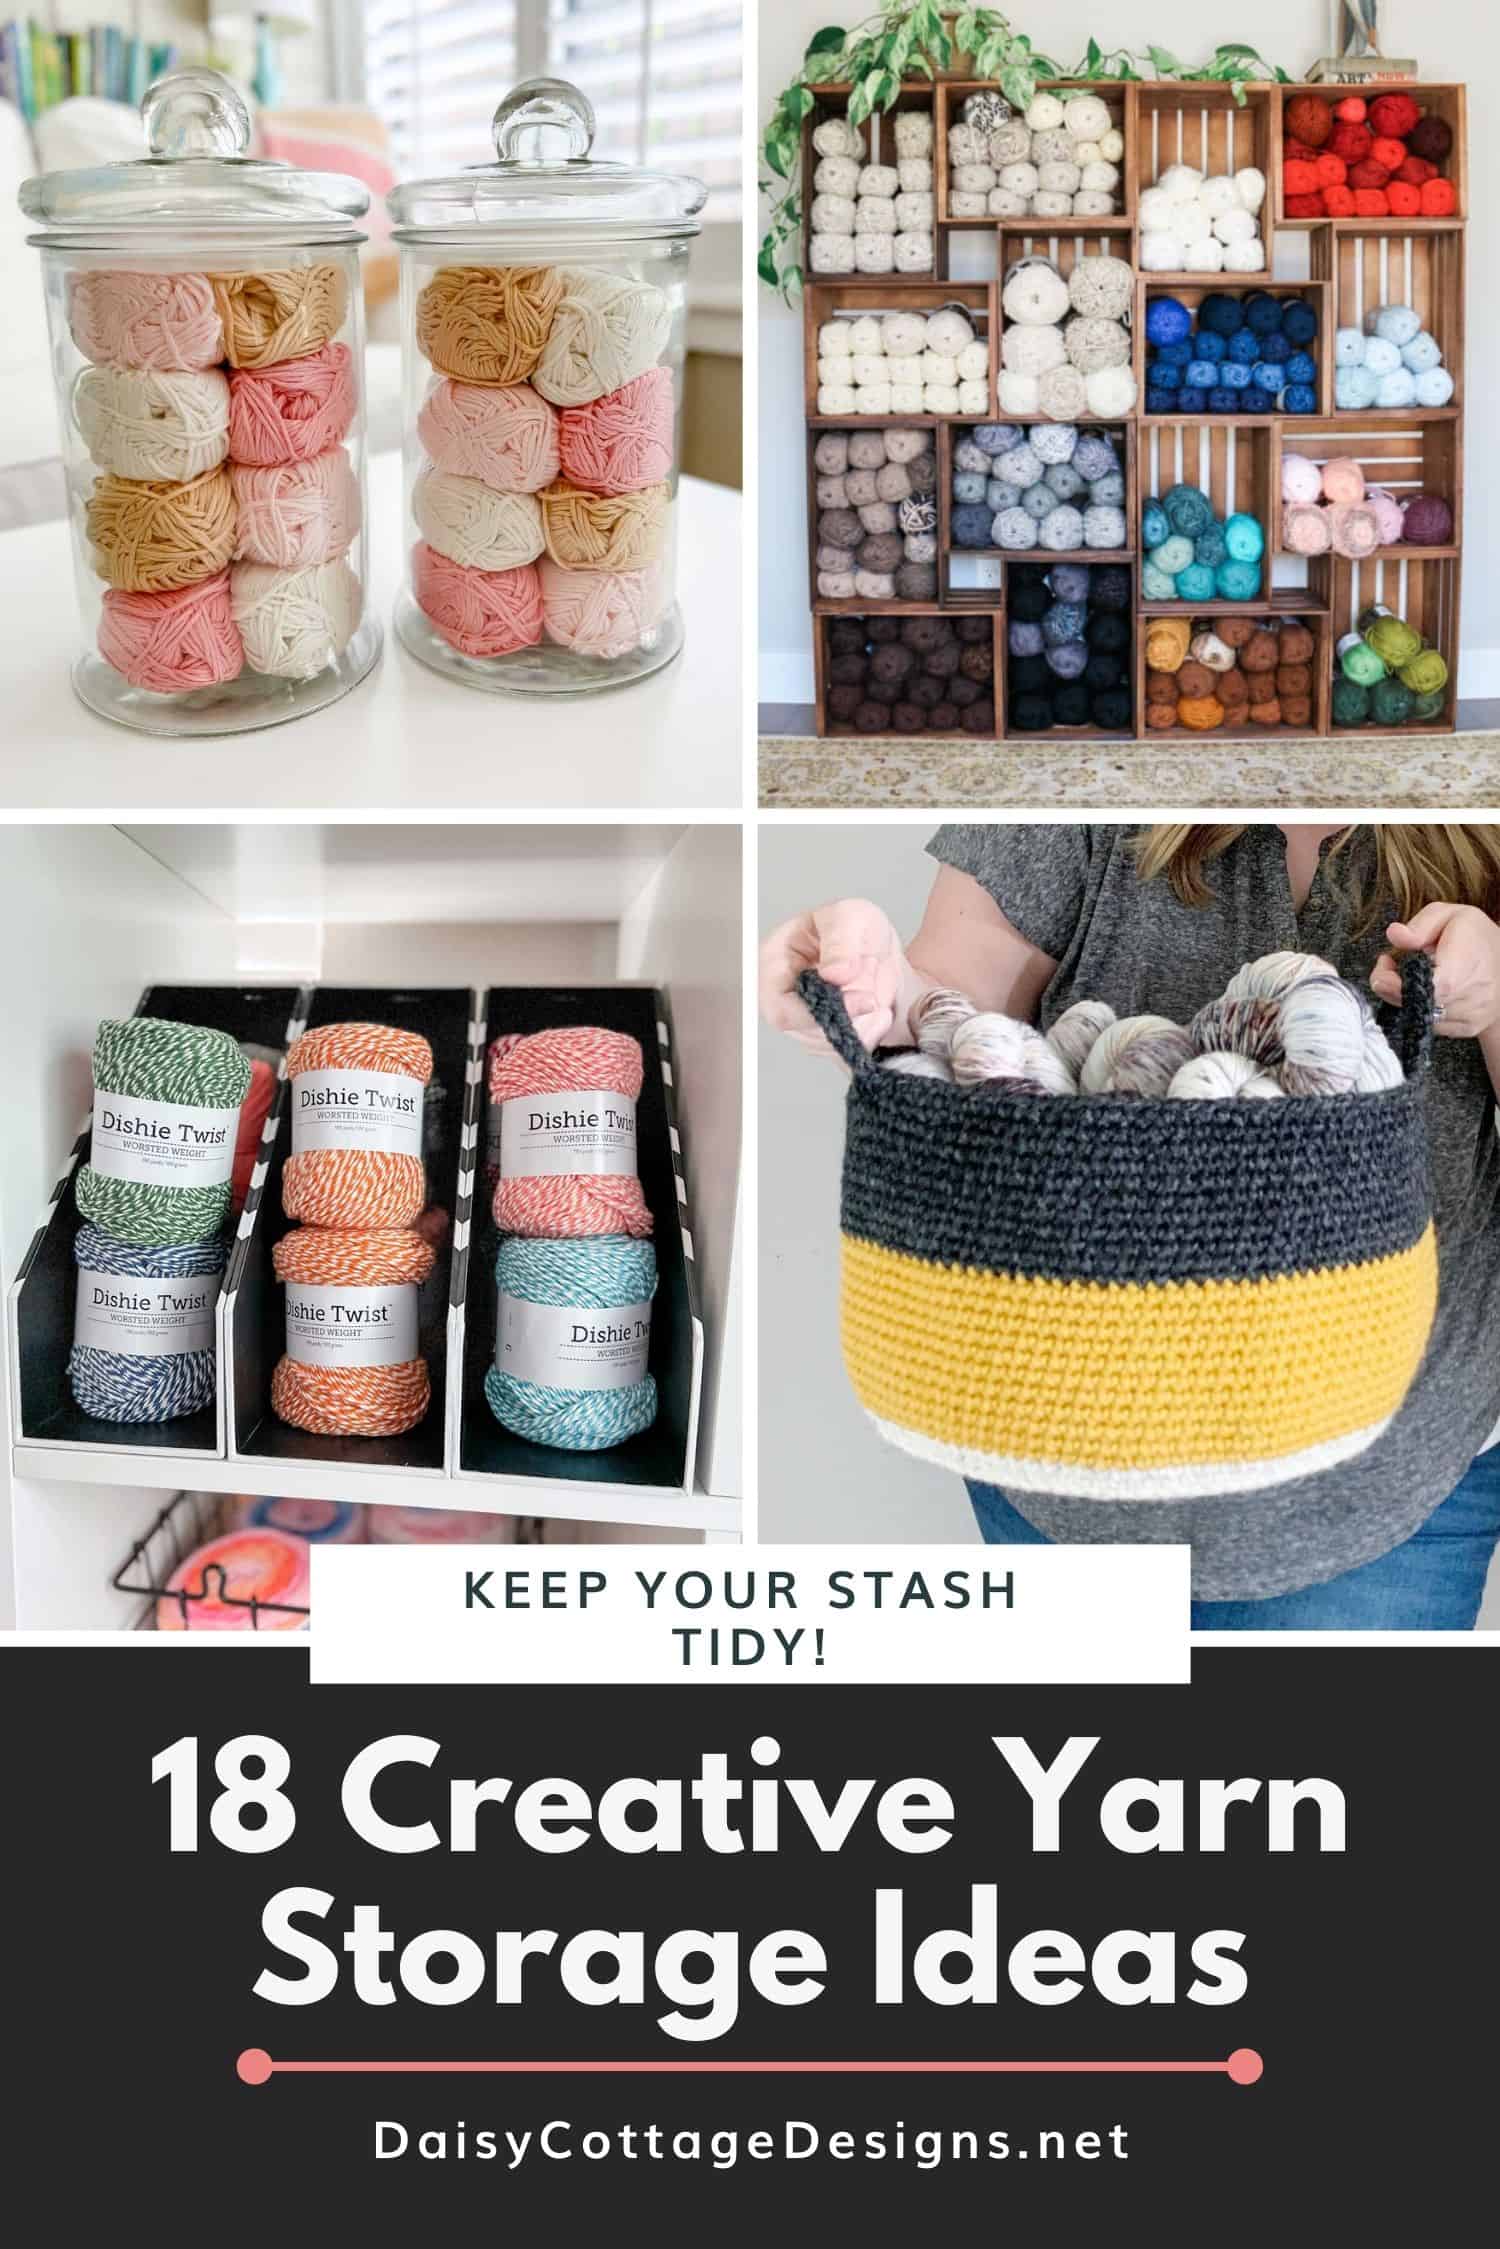 7 Clever Ideas for Organizing and Storing Yarn